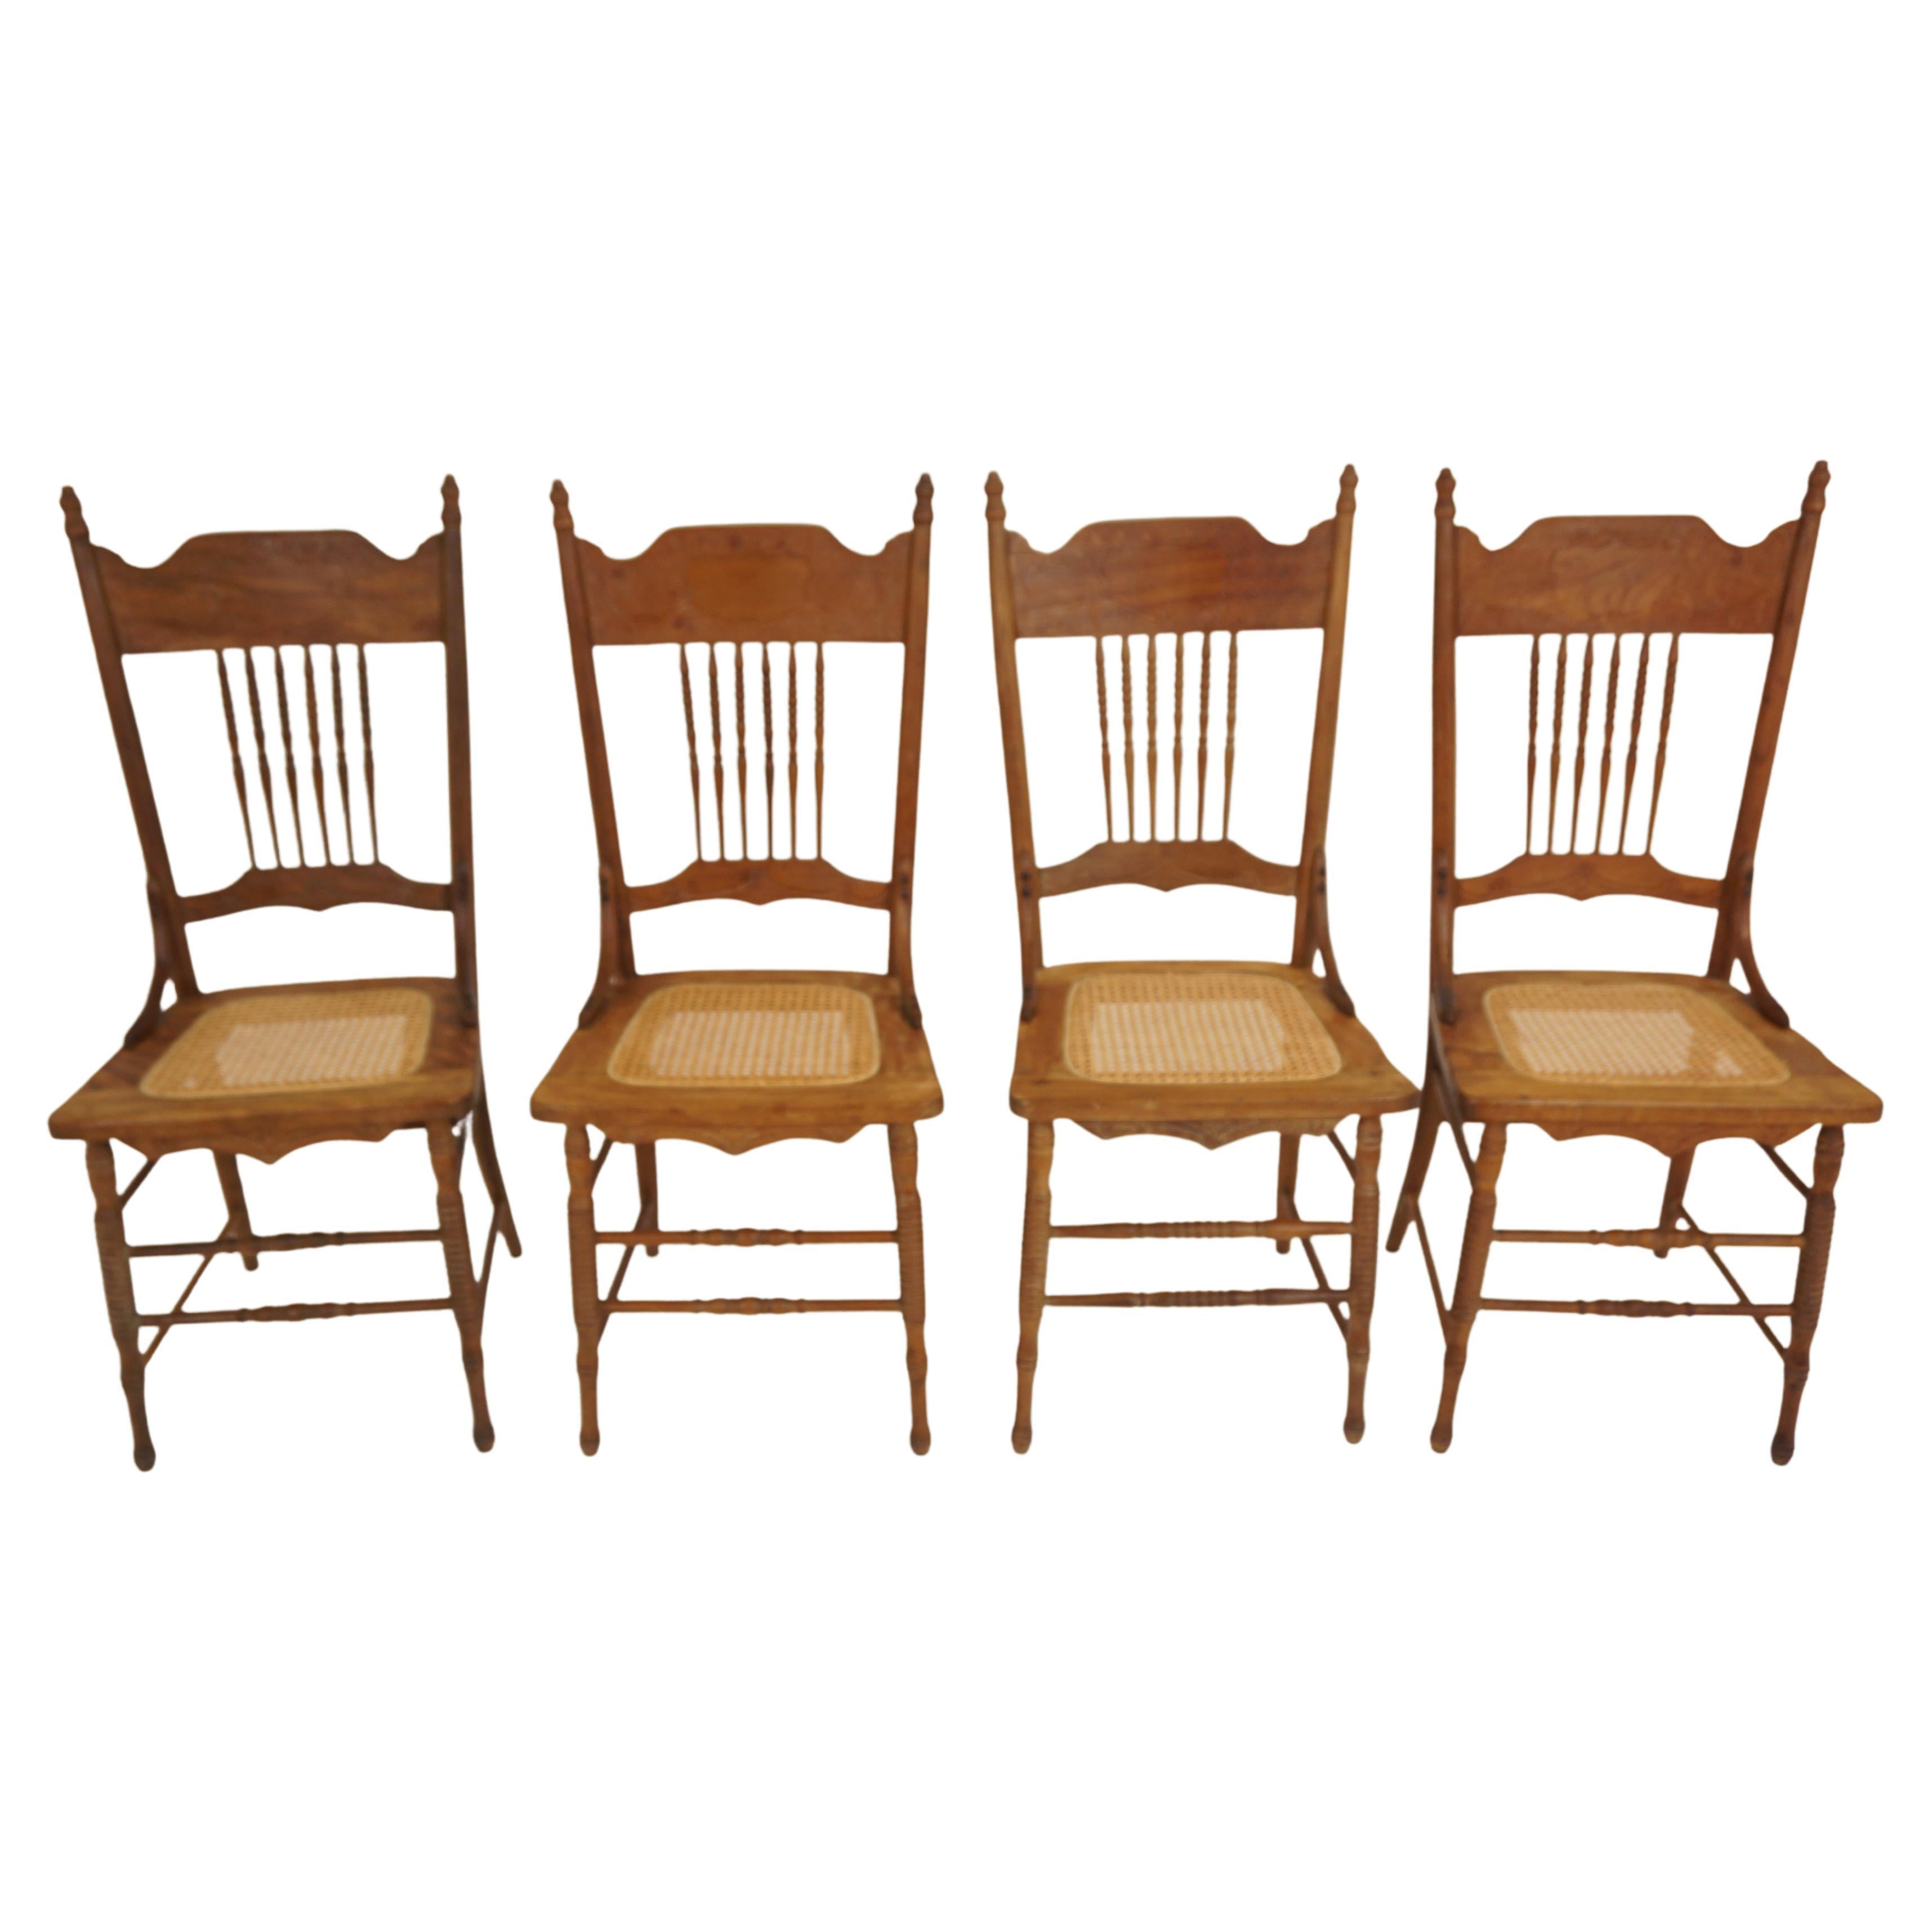 Set of 4 Antique Pressed Back Kitchen Chairs, American 1900, B2908